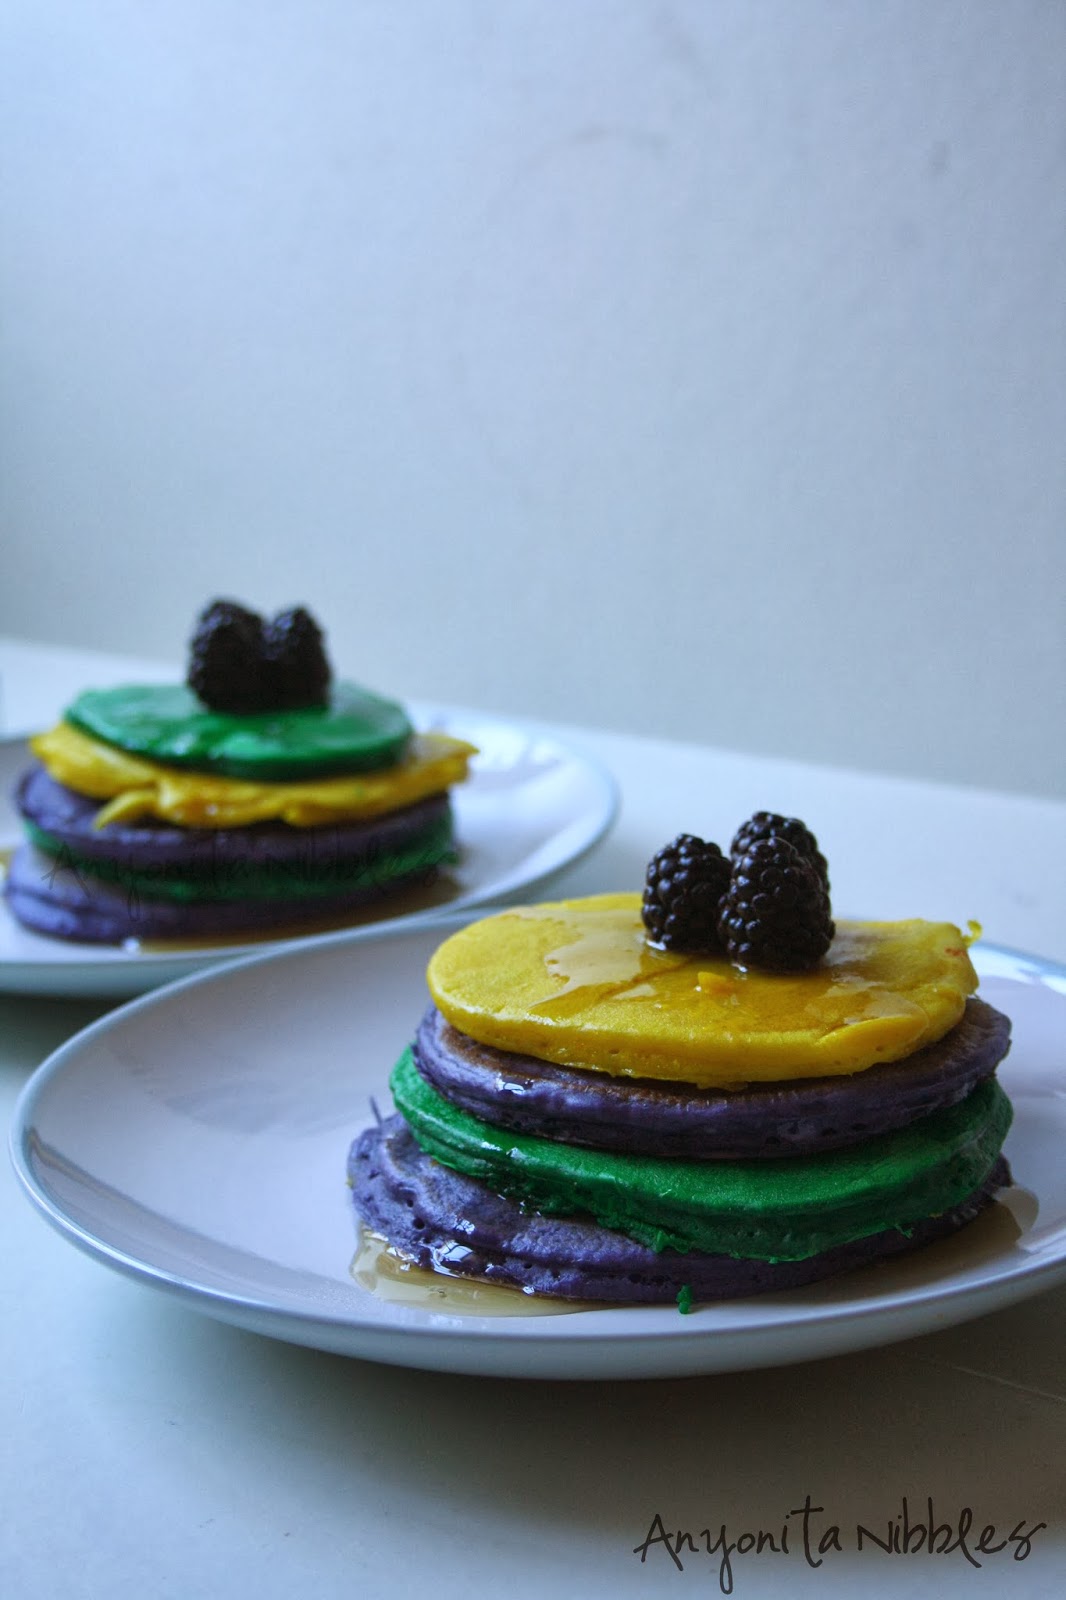 These thick, American-style pancakes are perfect for celebrating Mardi Gras